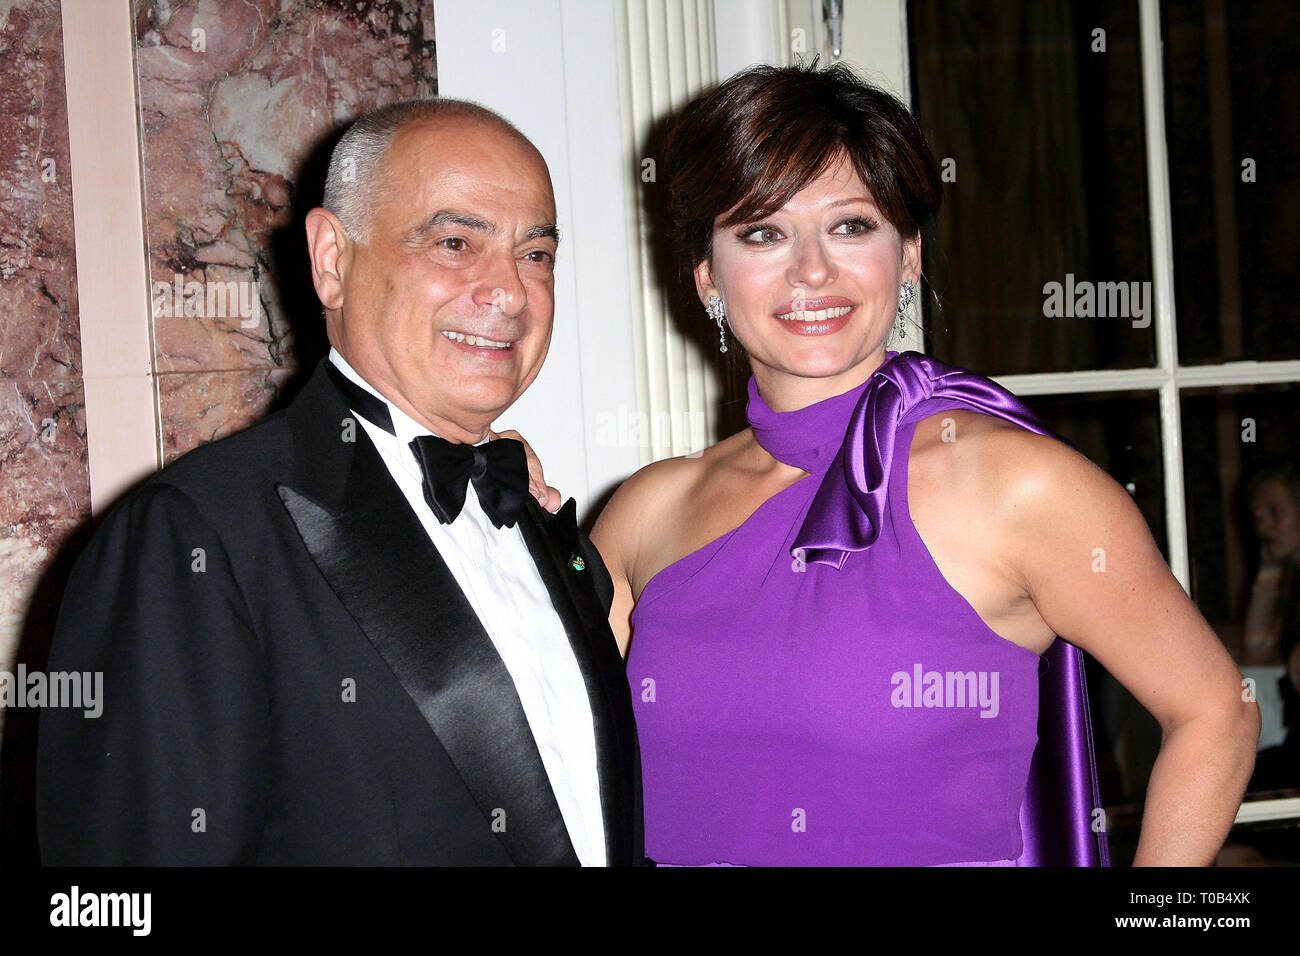 New York, NY, USA. 06 Oct, 2007. NBC Financial Journalist and Producer, Maria Bartiromo, (R) at The Saturday, Oct 6, 2007 Columbus Citizens Foundation's Gala at The Waldorf=Astoria in New York, NY, USA. Credit: Steve Mack/S.D. Mack Pictures/Alamy Stock Photo